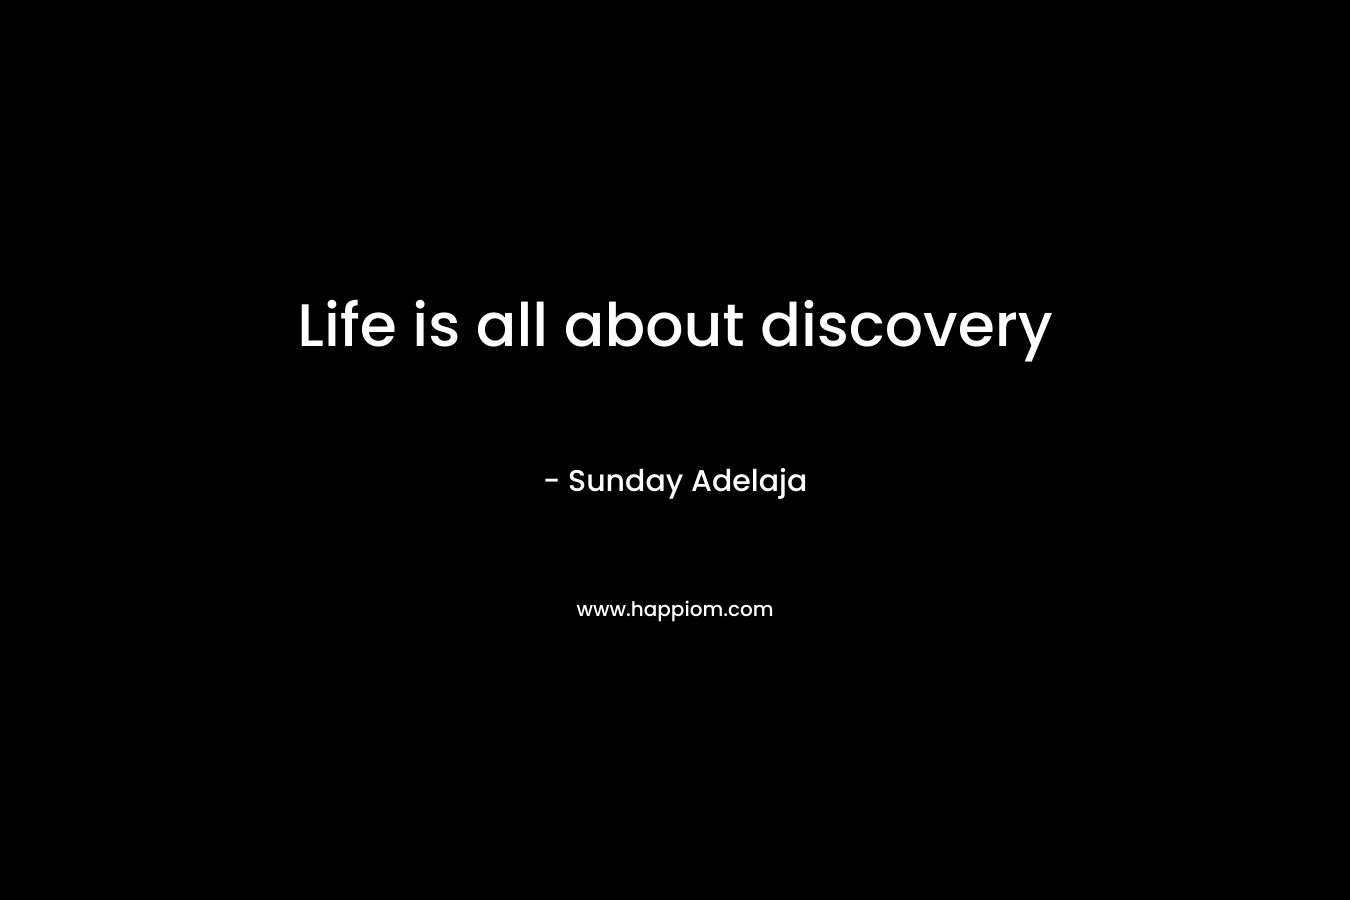 Life is all about discovery